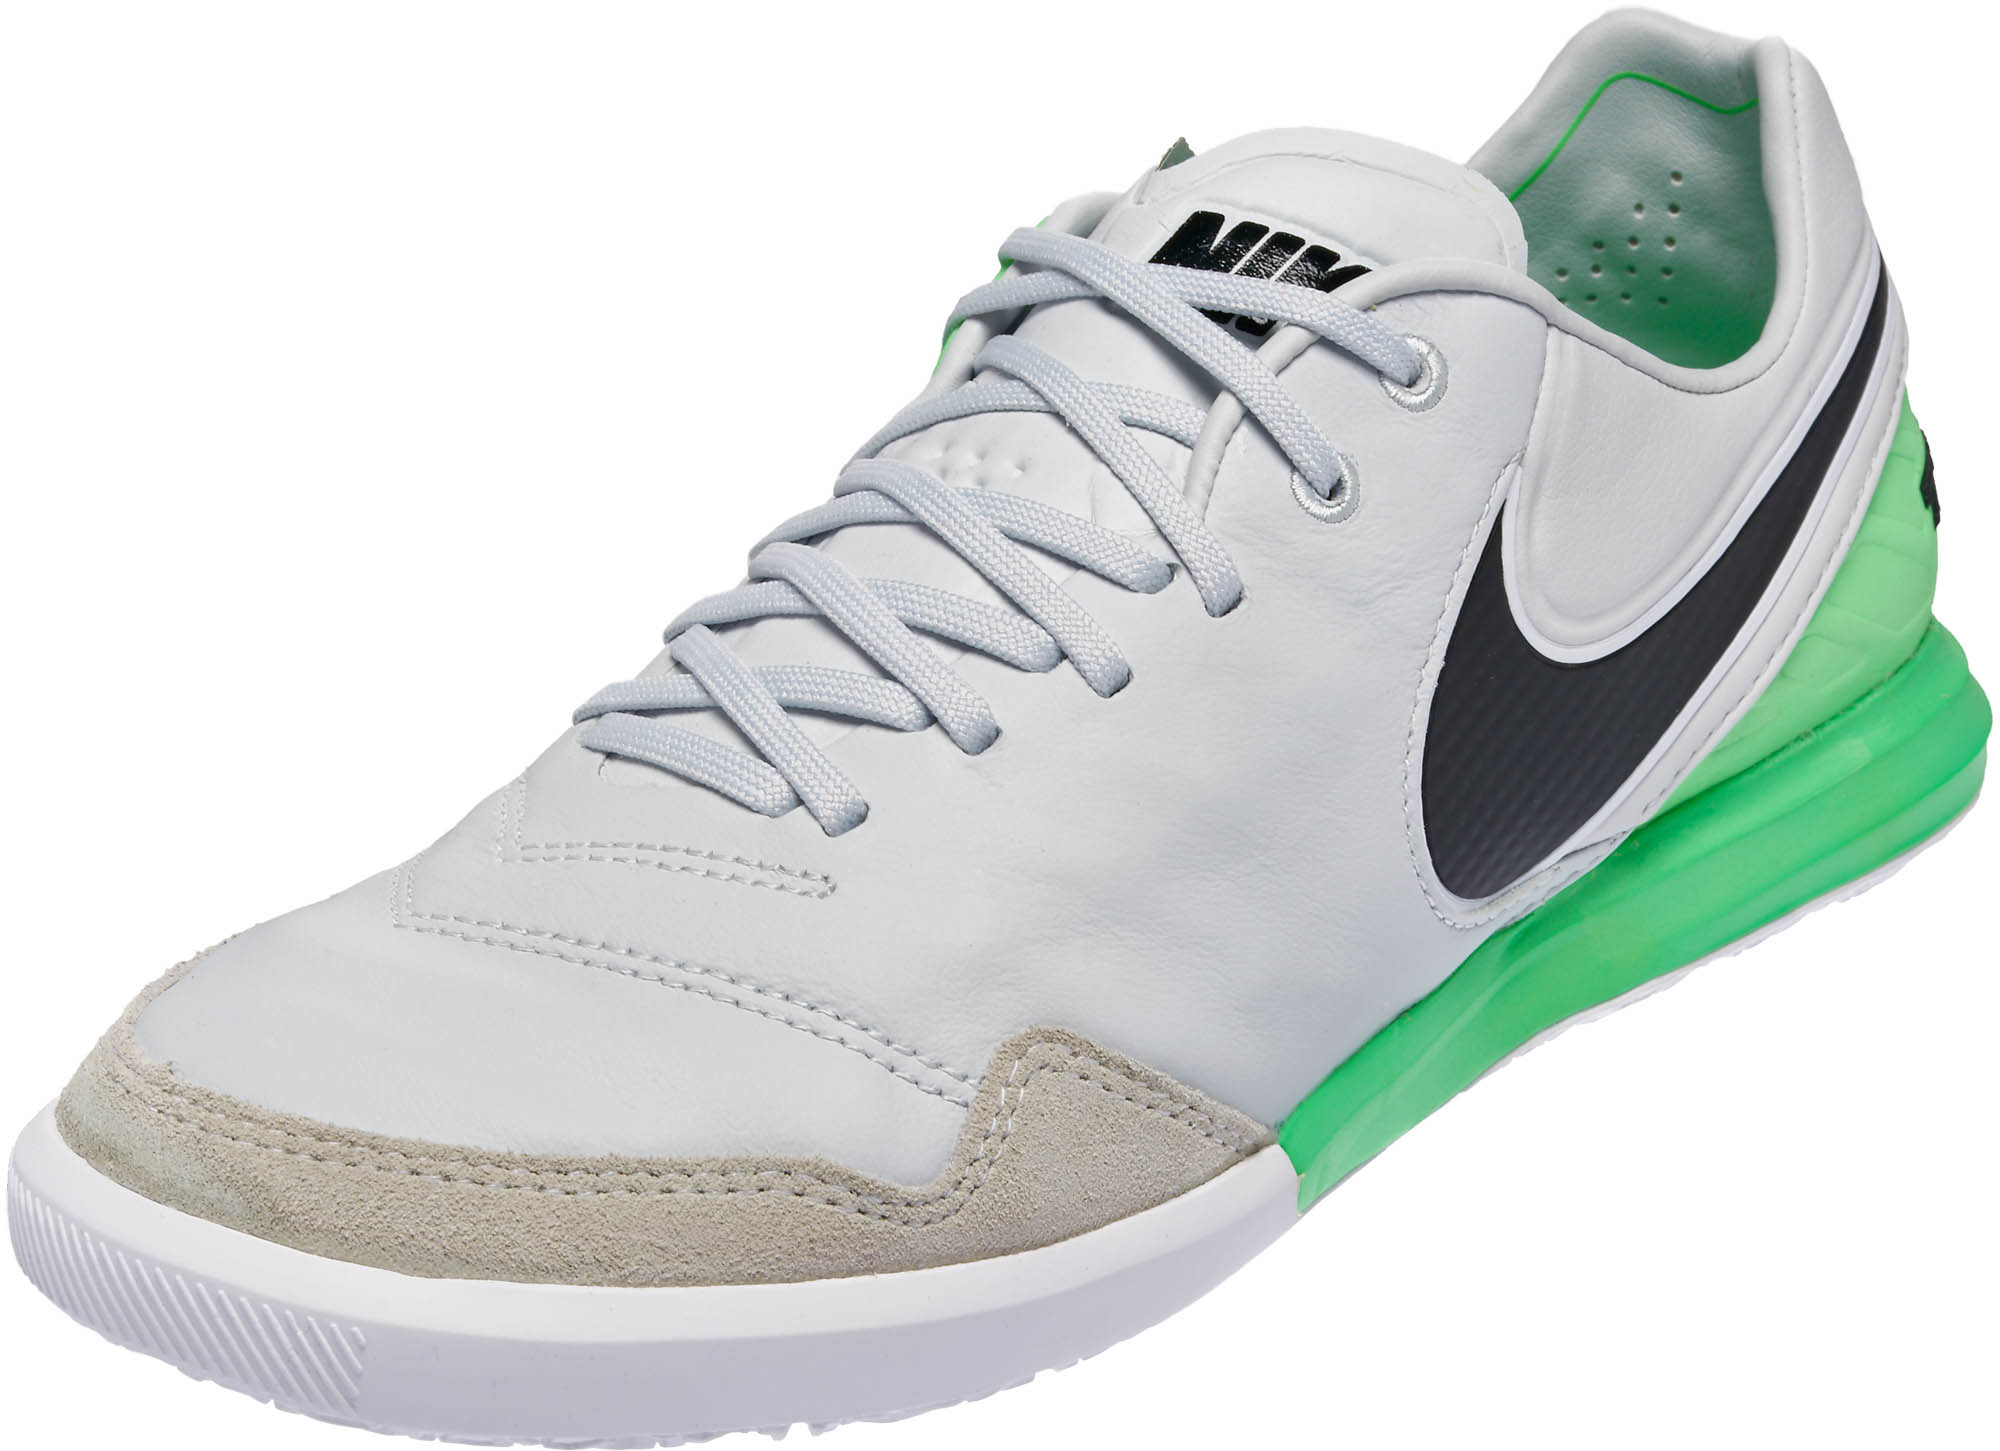 Fore type Civilize relax Nike TiempoX Proximo IC - Silver SCCRX Indoor Shoes